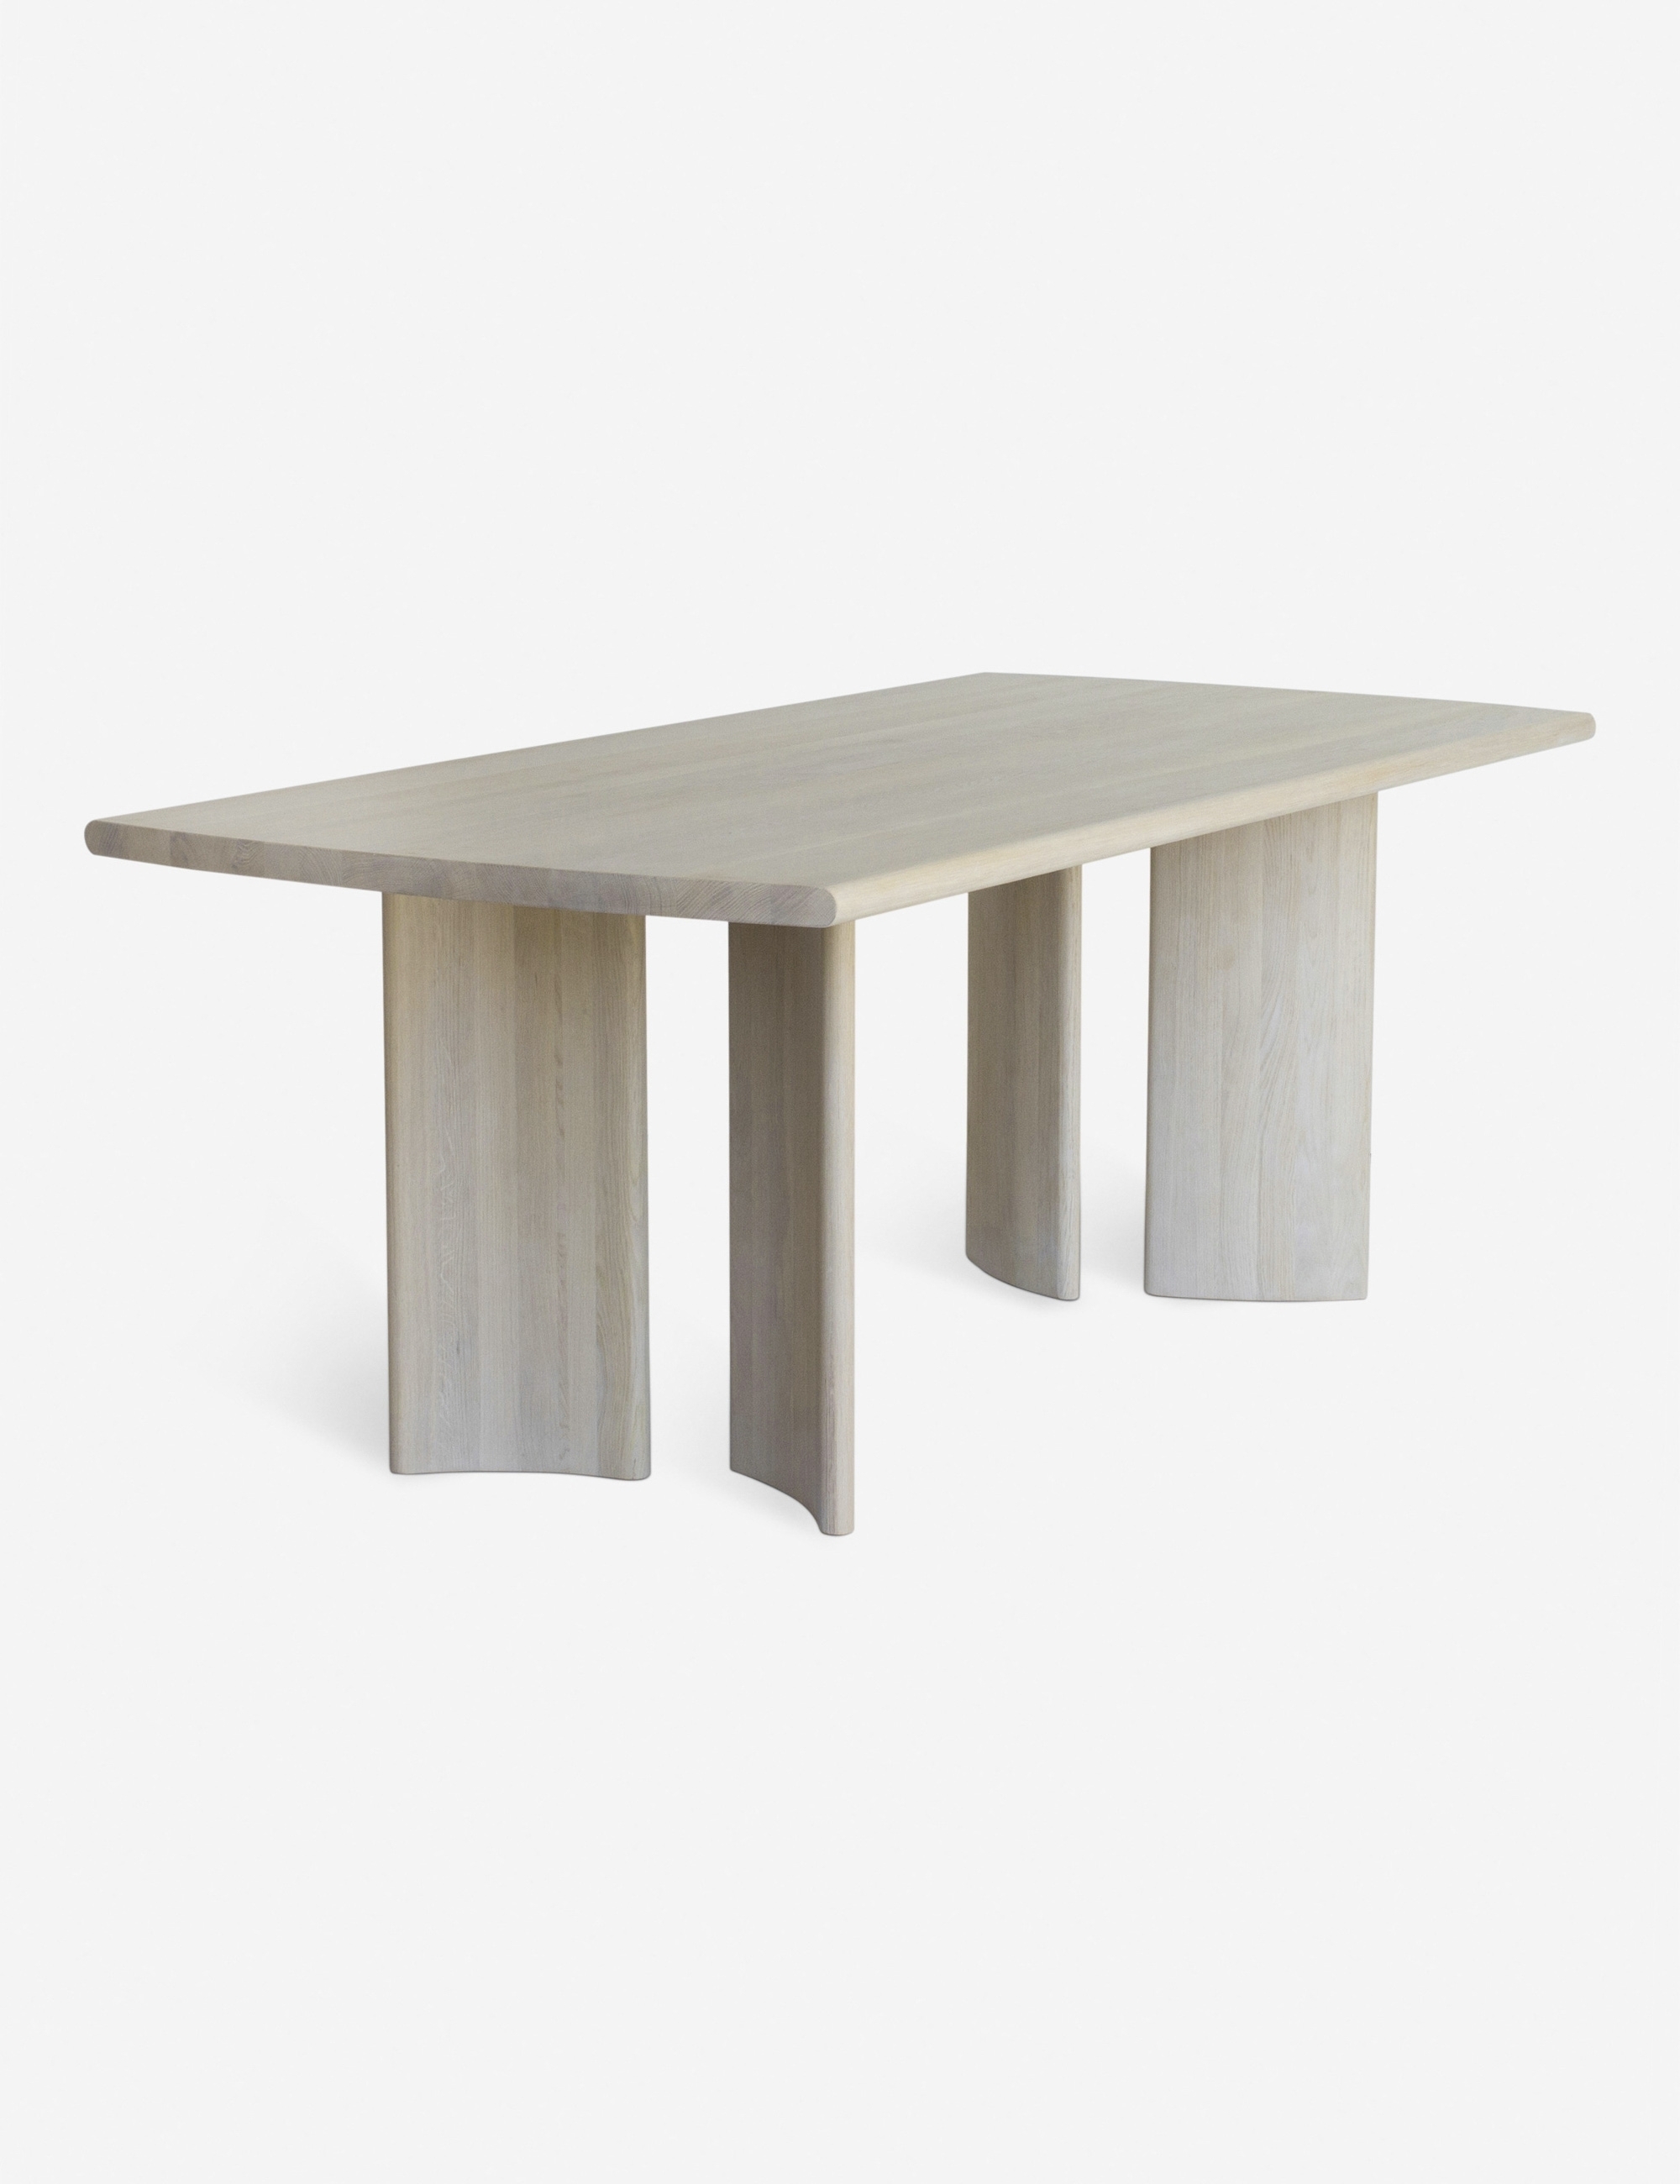 Sun at Six Crest Dining Table, Nude - Image 1